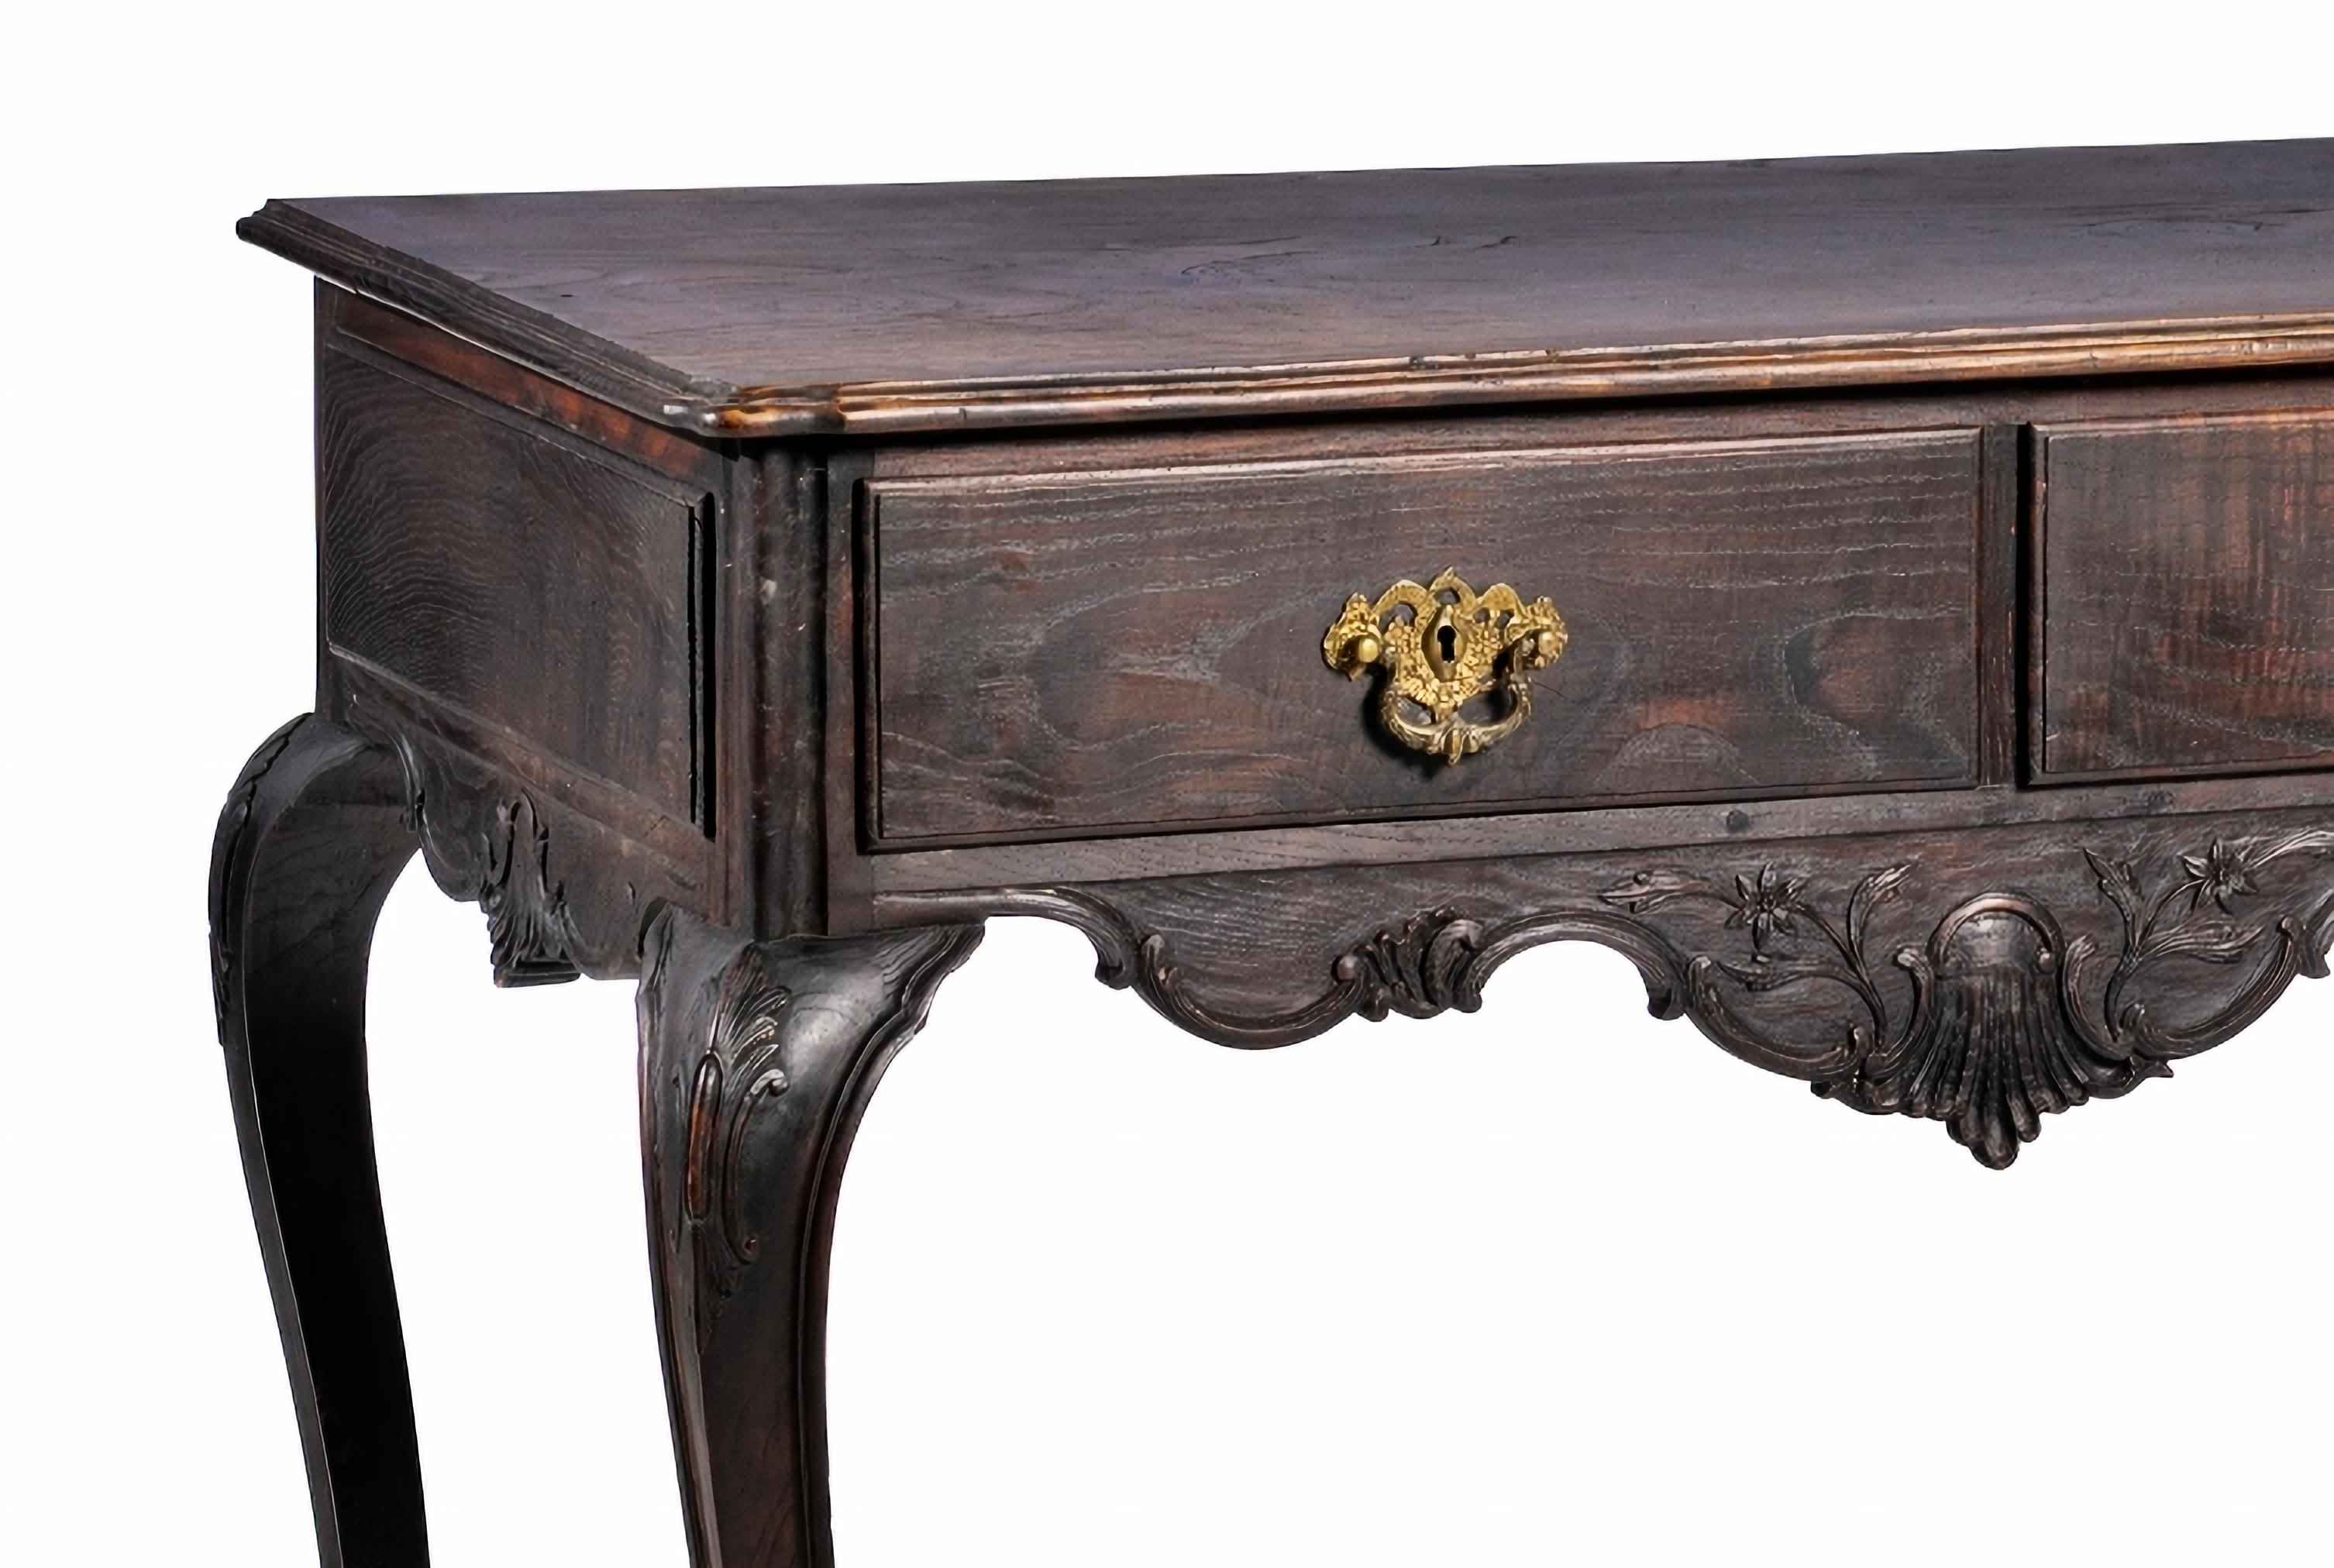 PORTUGUESE WALL TABLE 18th Century

in chestnut wood, waist with two drawers, skirts cut with carvings, resting on four curved feet.
Metal hardware.
Some small defects.
Dim.: 86 x 104 x 58 cm
good conditions